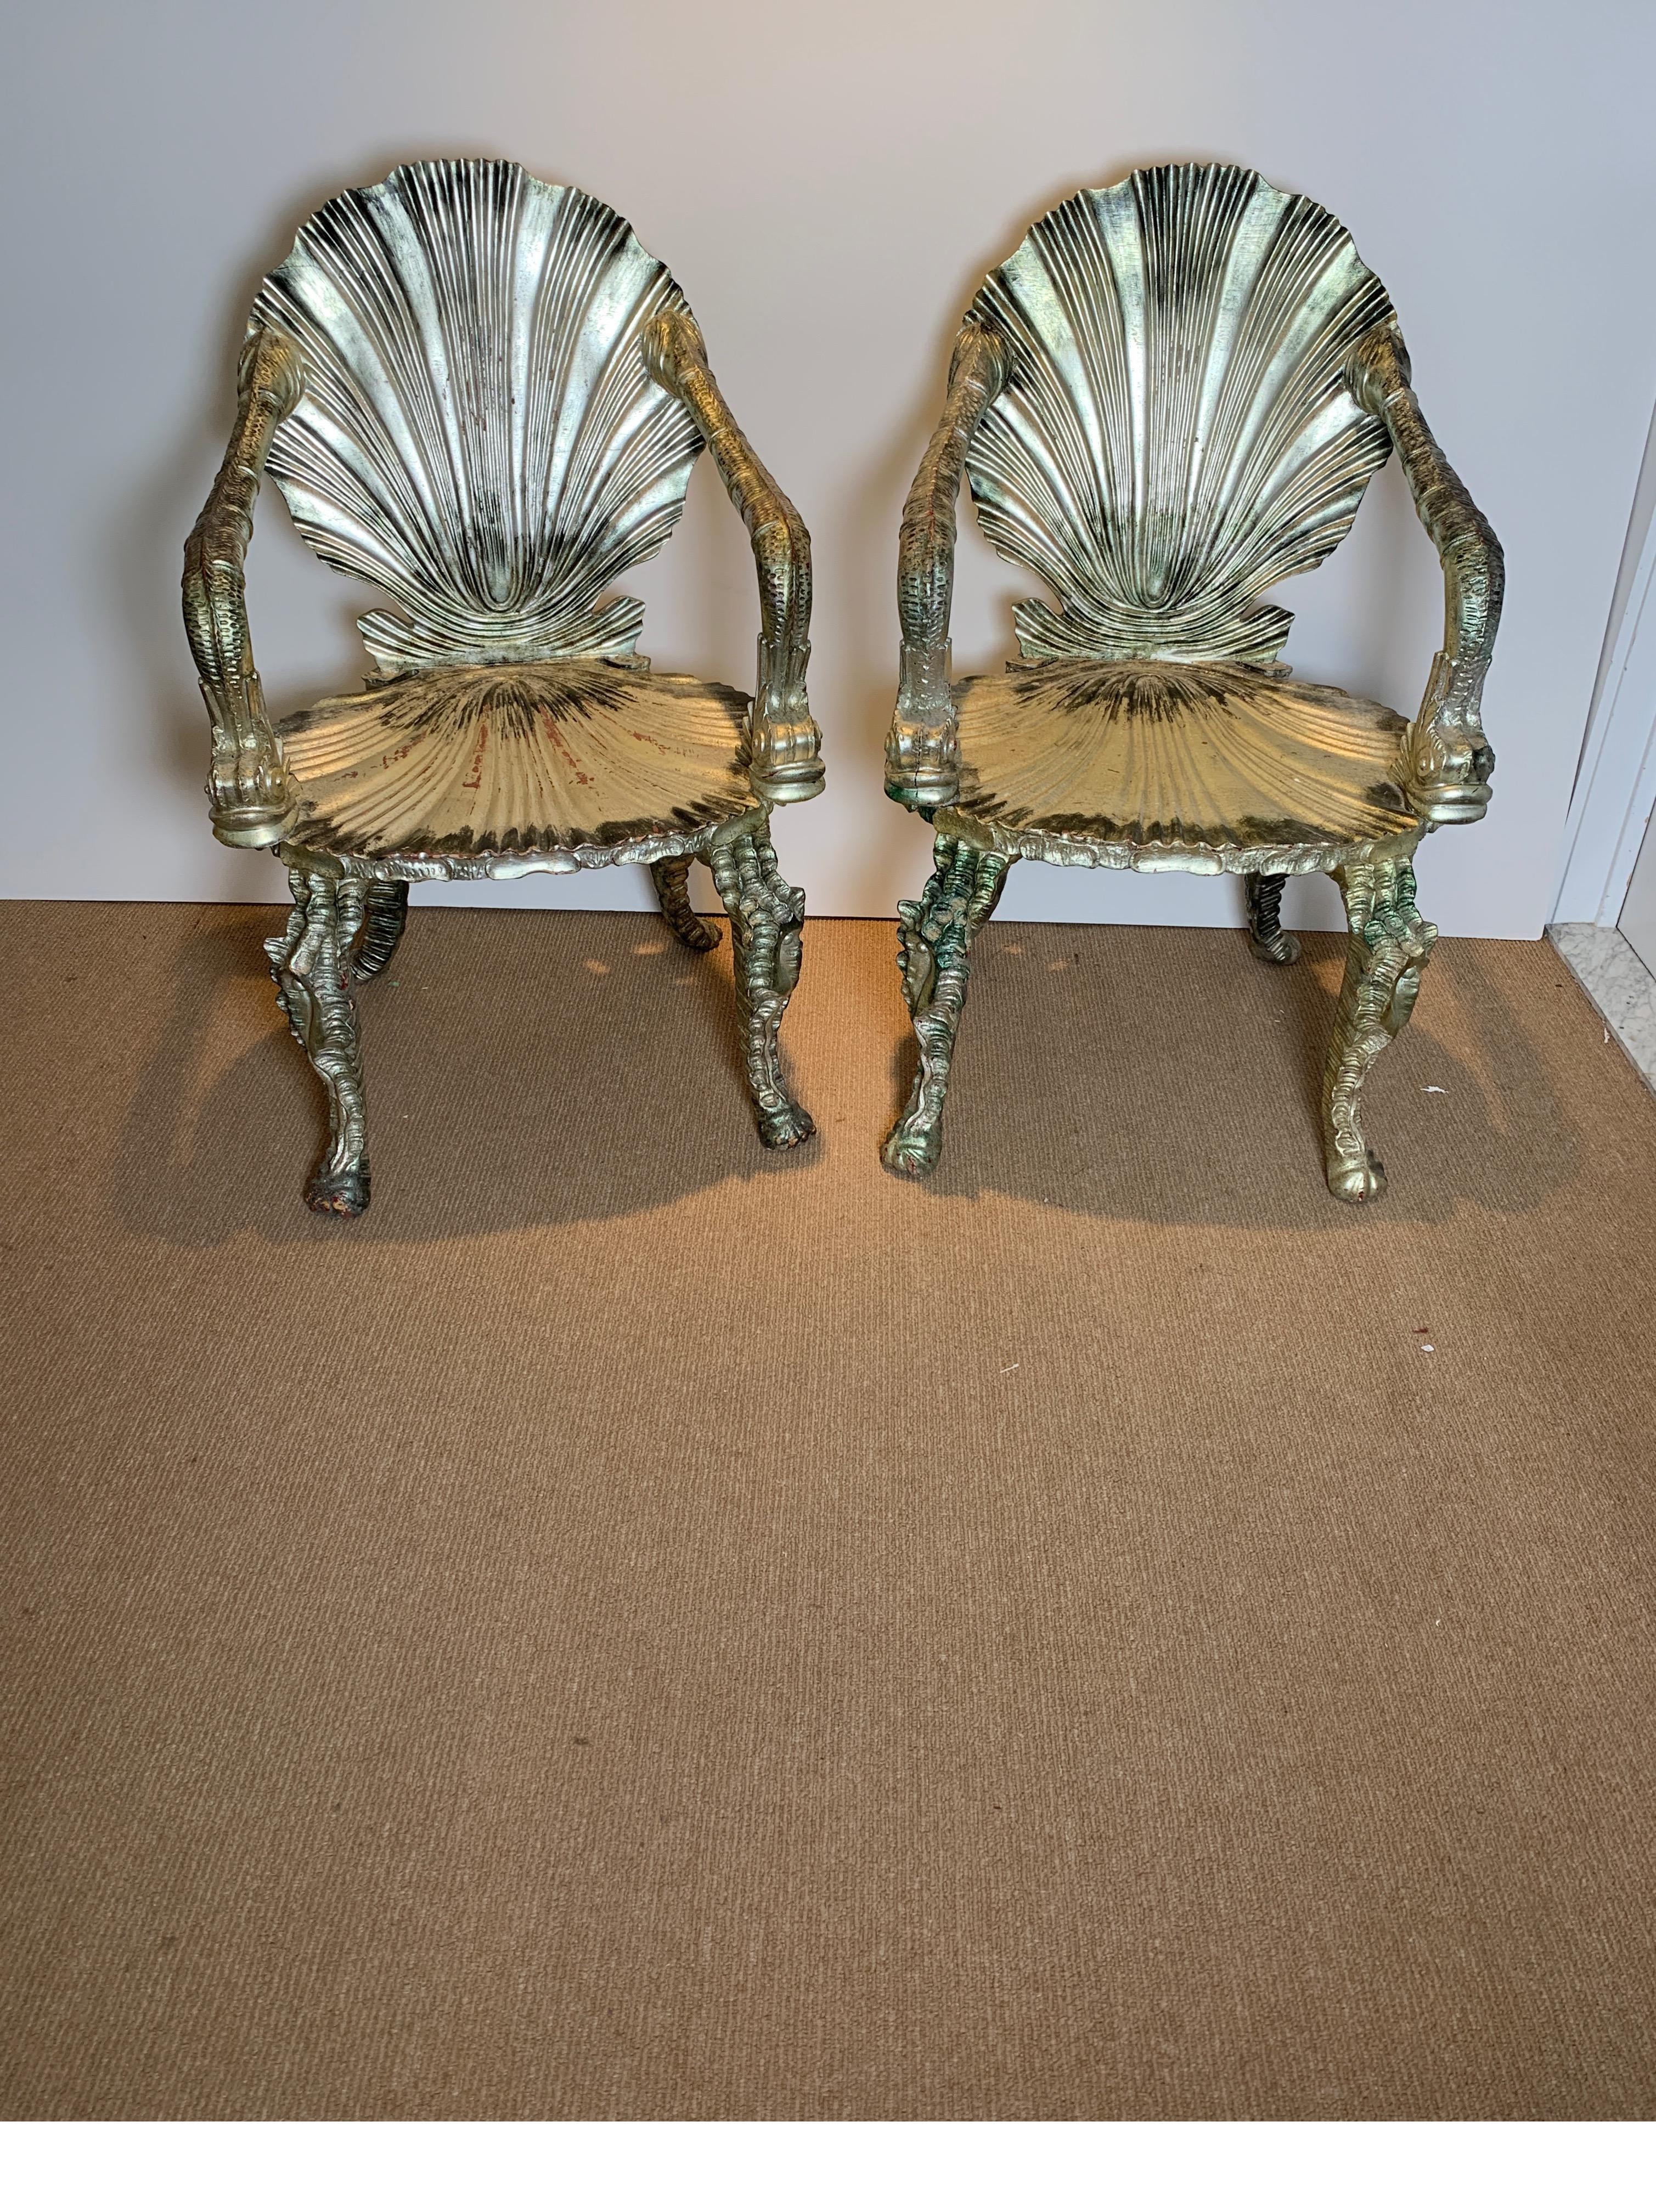 A pair of Venetian carved wood silver leaf grotto chairs. Whimsically carved chairs with shell back and seat, dolphin arms and legs in a sea horse tail motif. Italy, early 20th century.

 